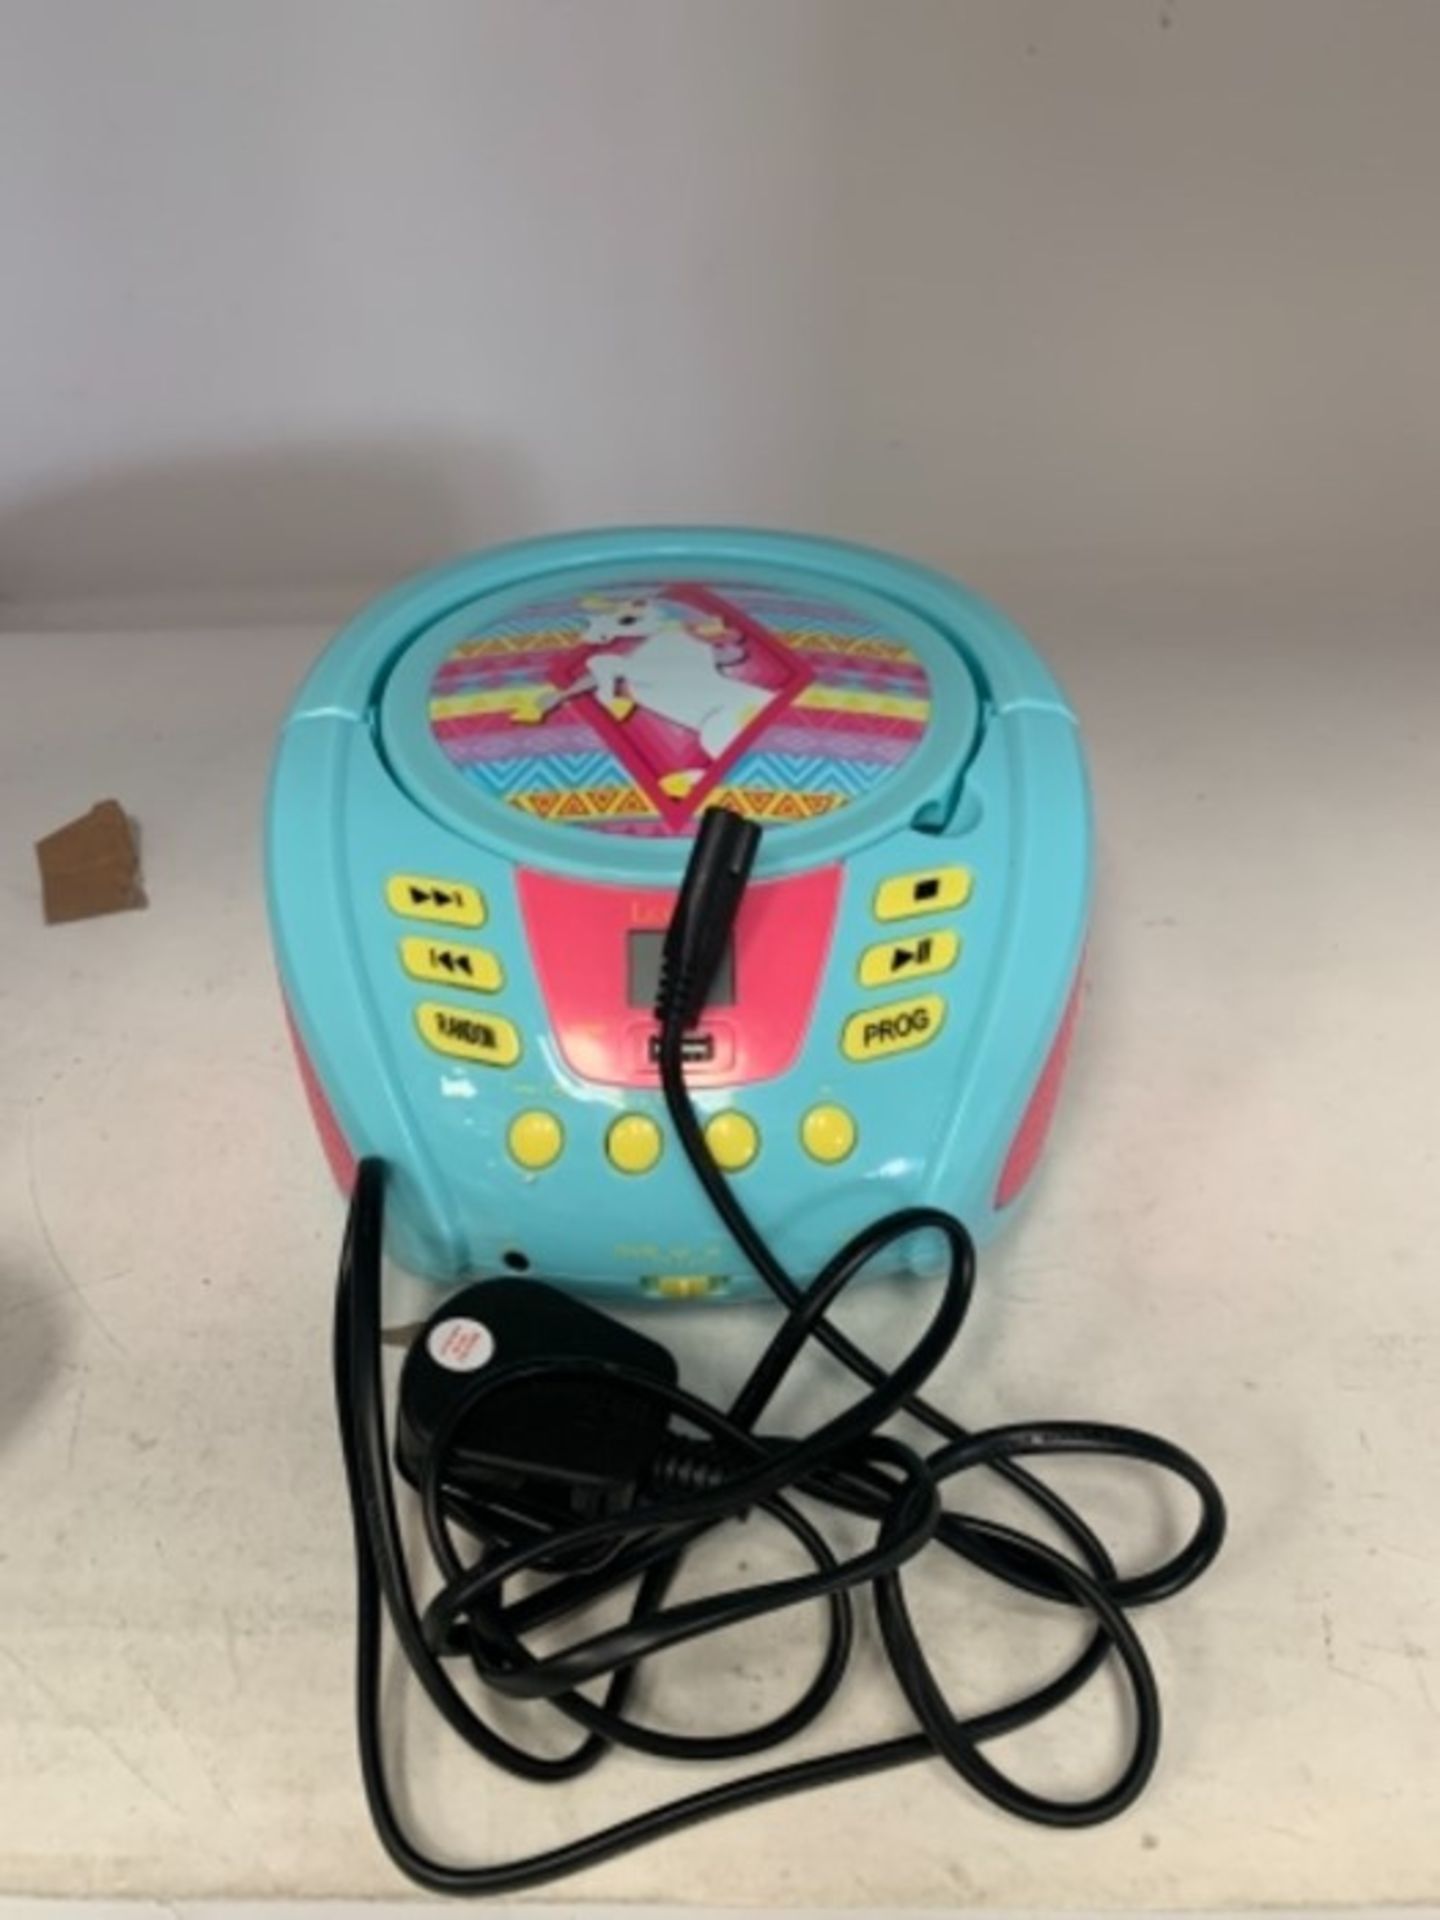 Lexibook CD Player Unicorn, AUX-in Jack, USB Port, AC or Battery-Operated, Blue/Pink, - Image 2 of 2